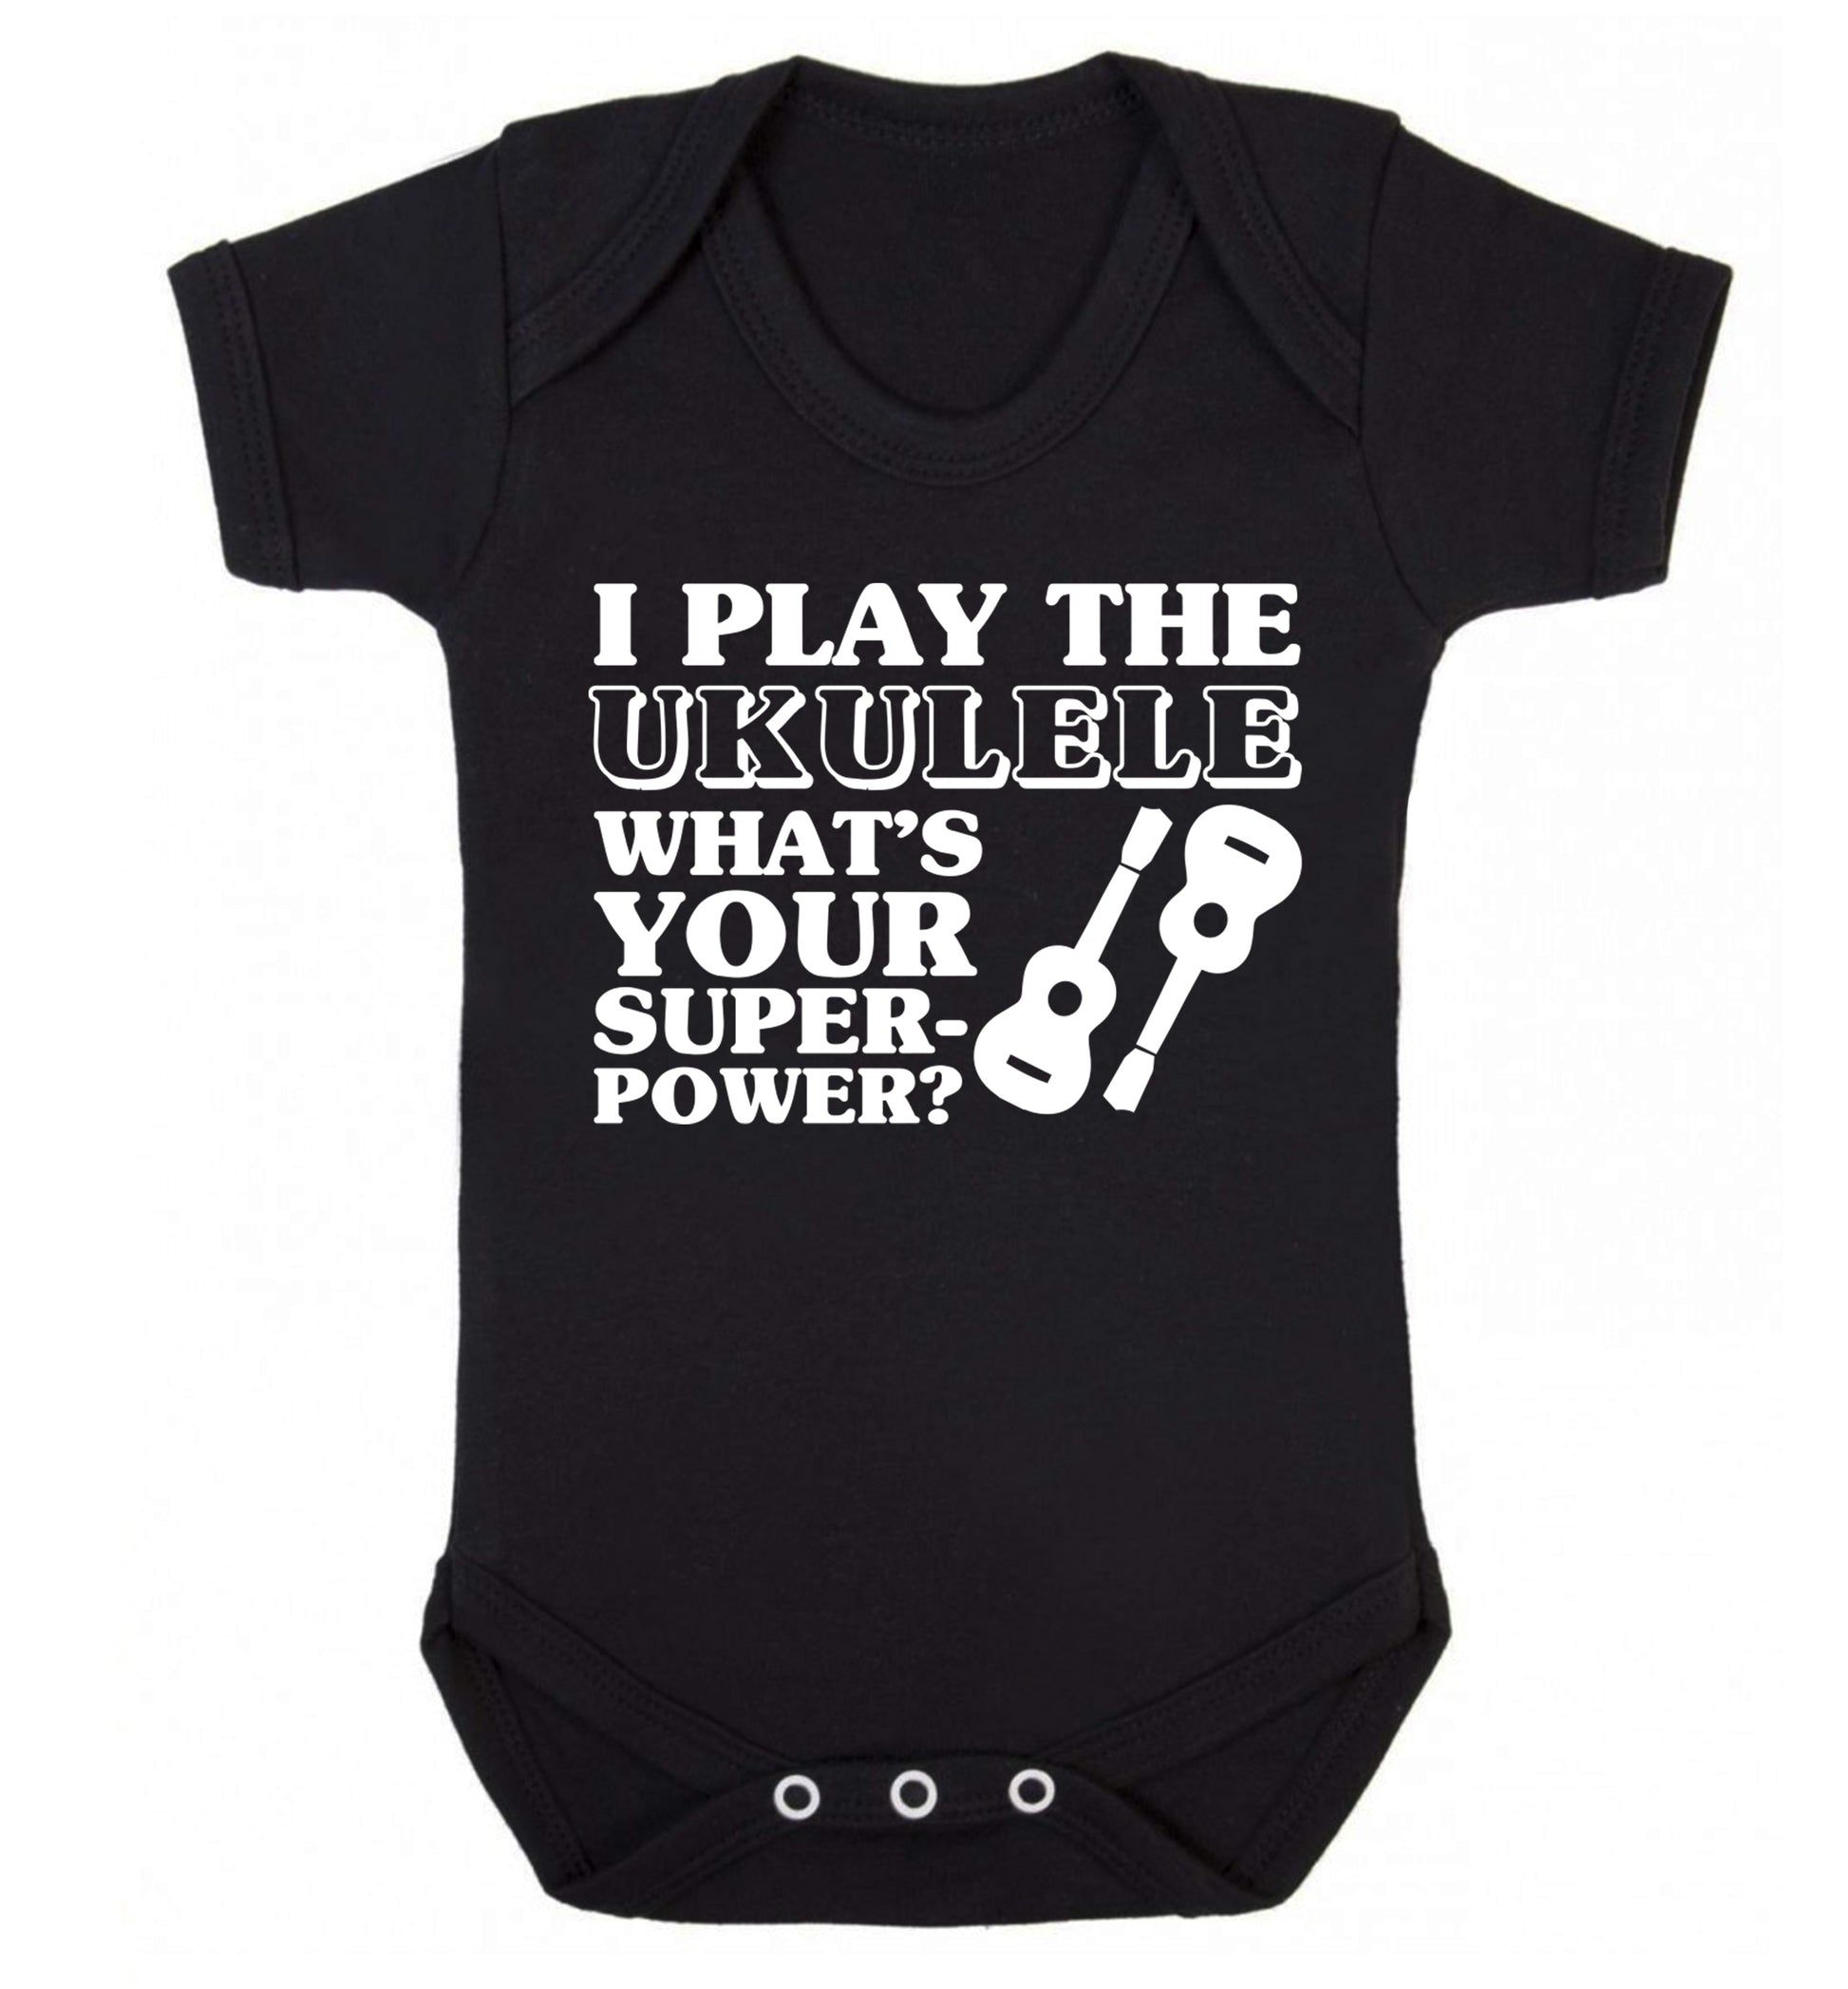 I play the ukulele what's your superpower? Baby Vest black 18-24 months